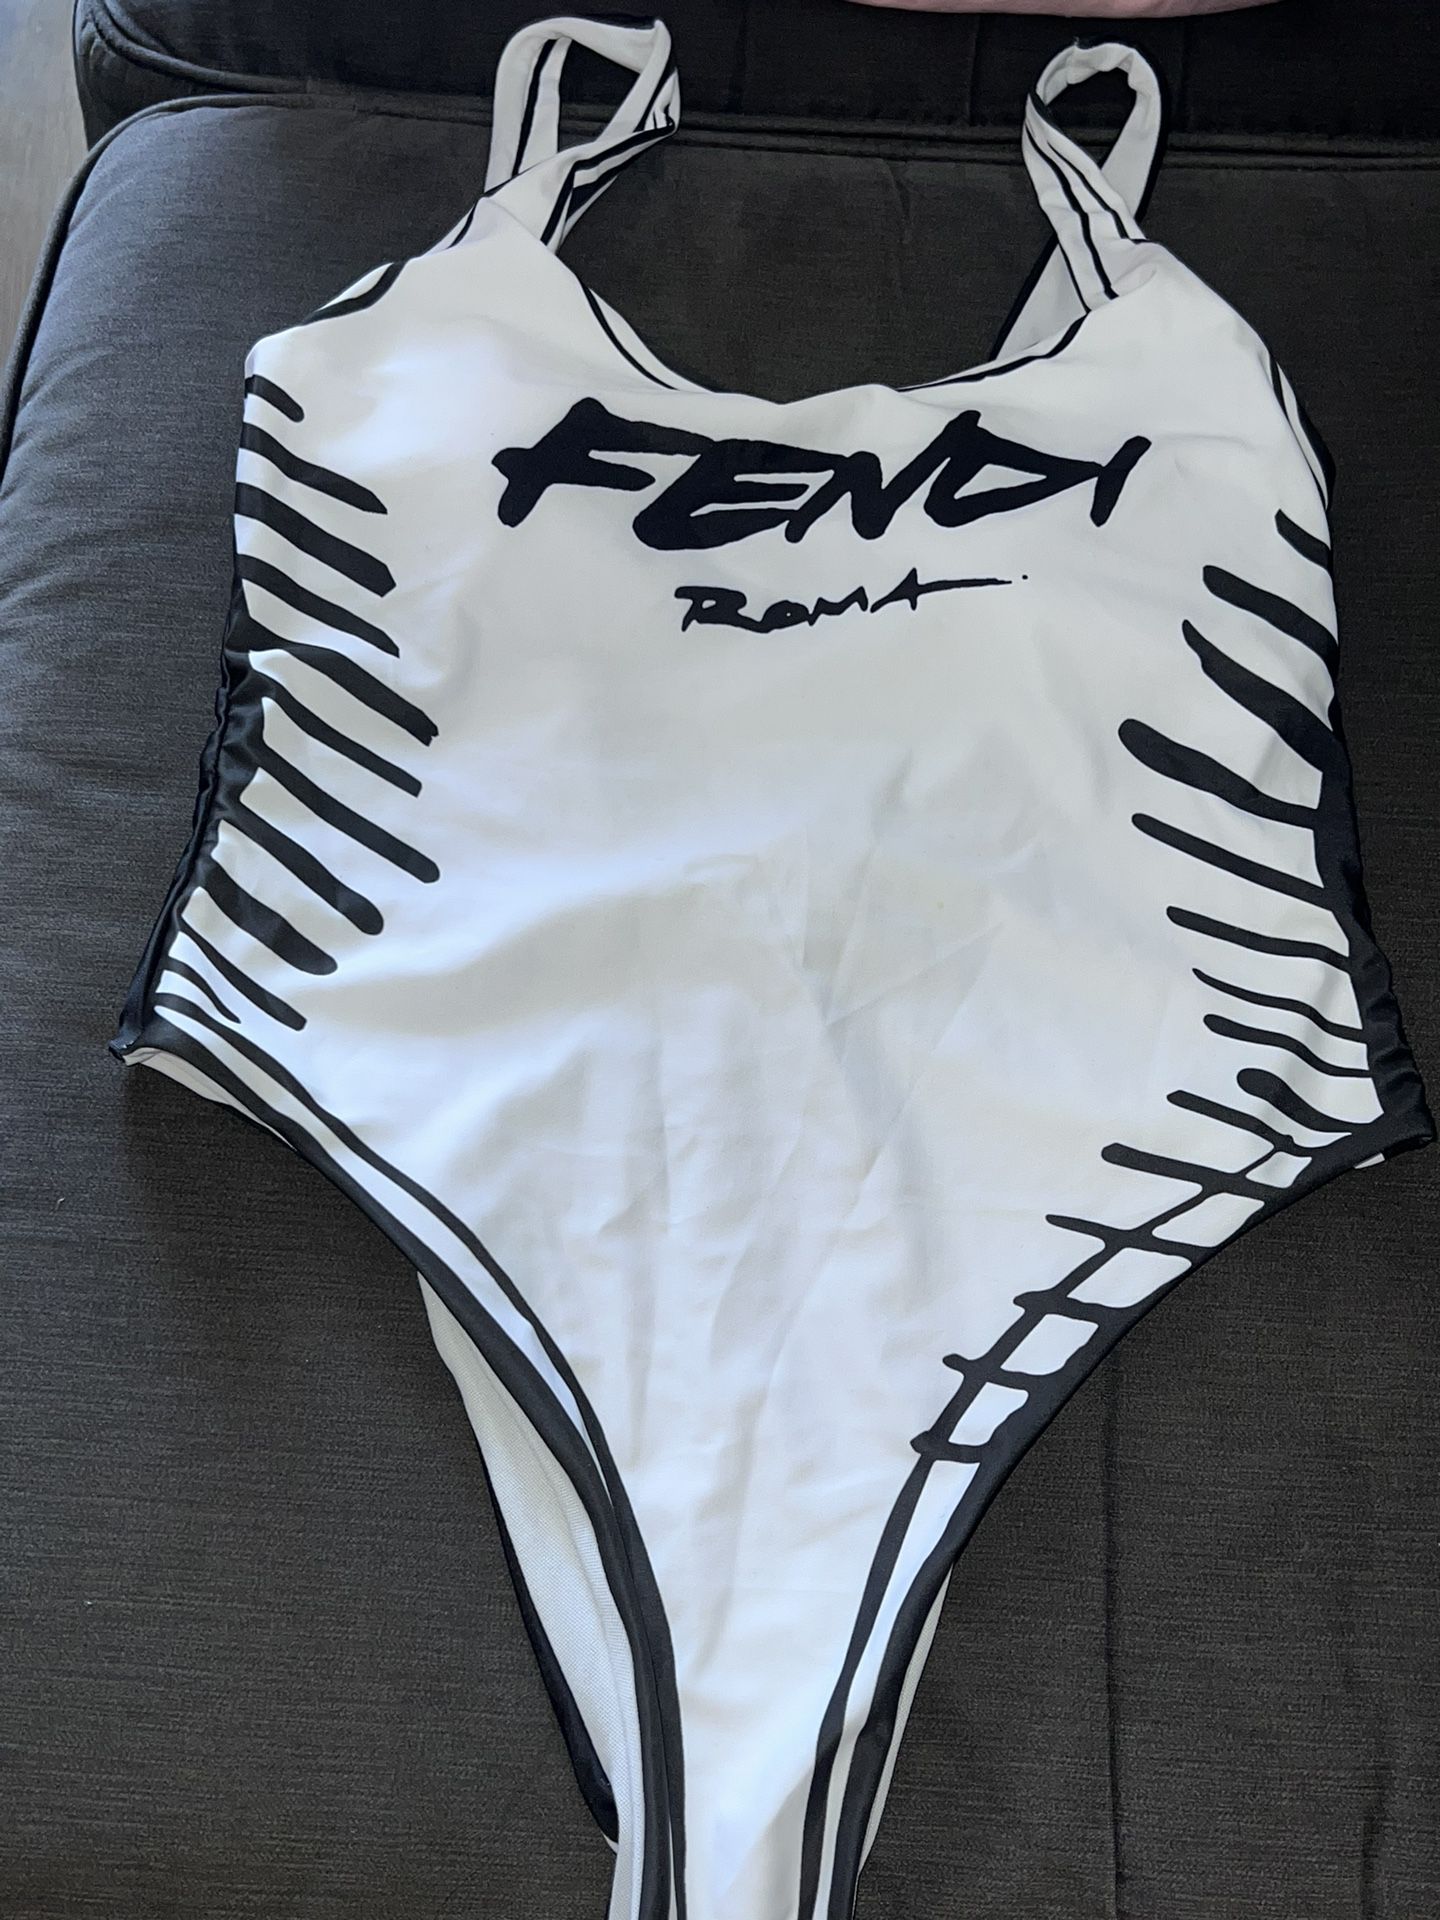 Fendi Bathing Suit for Sale in Paramount, CA - OfferUp